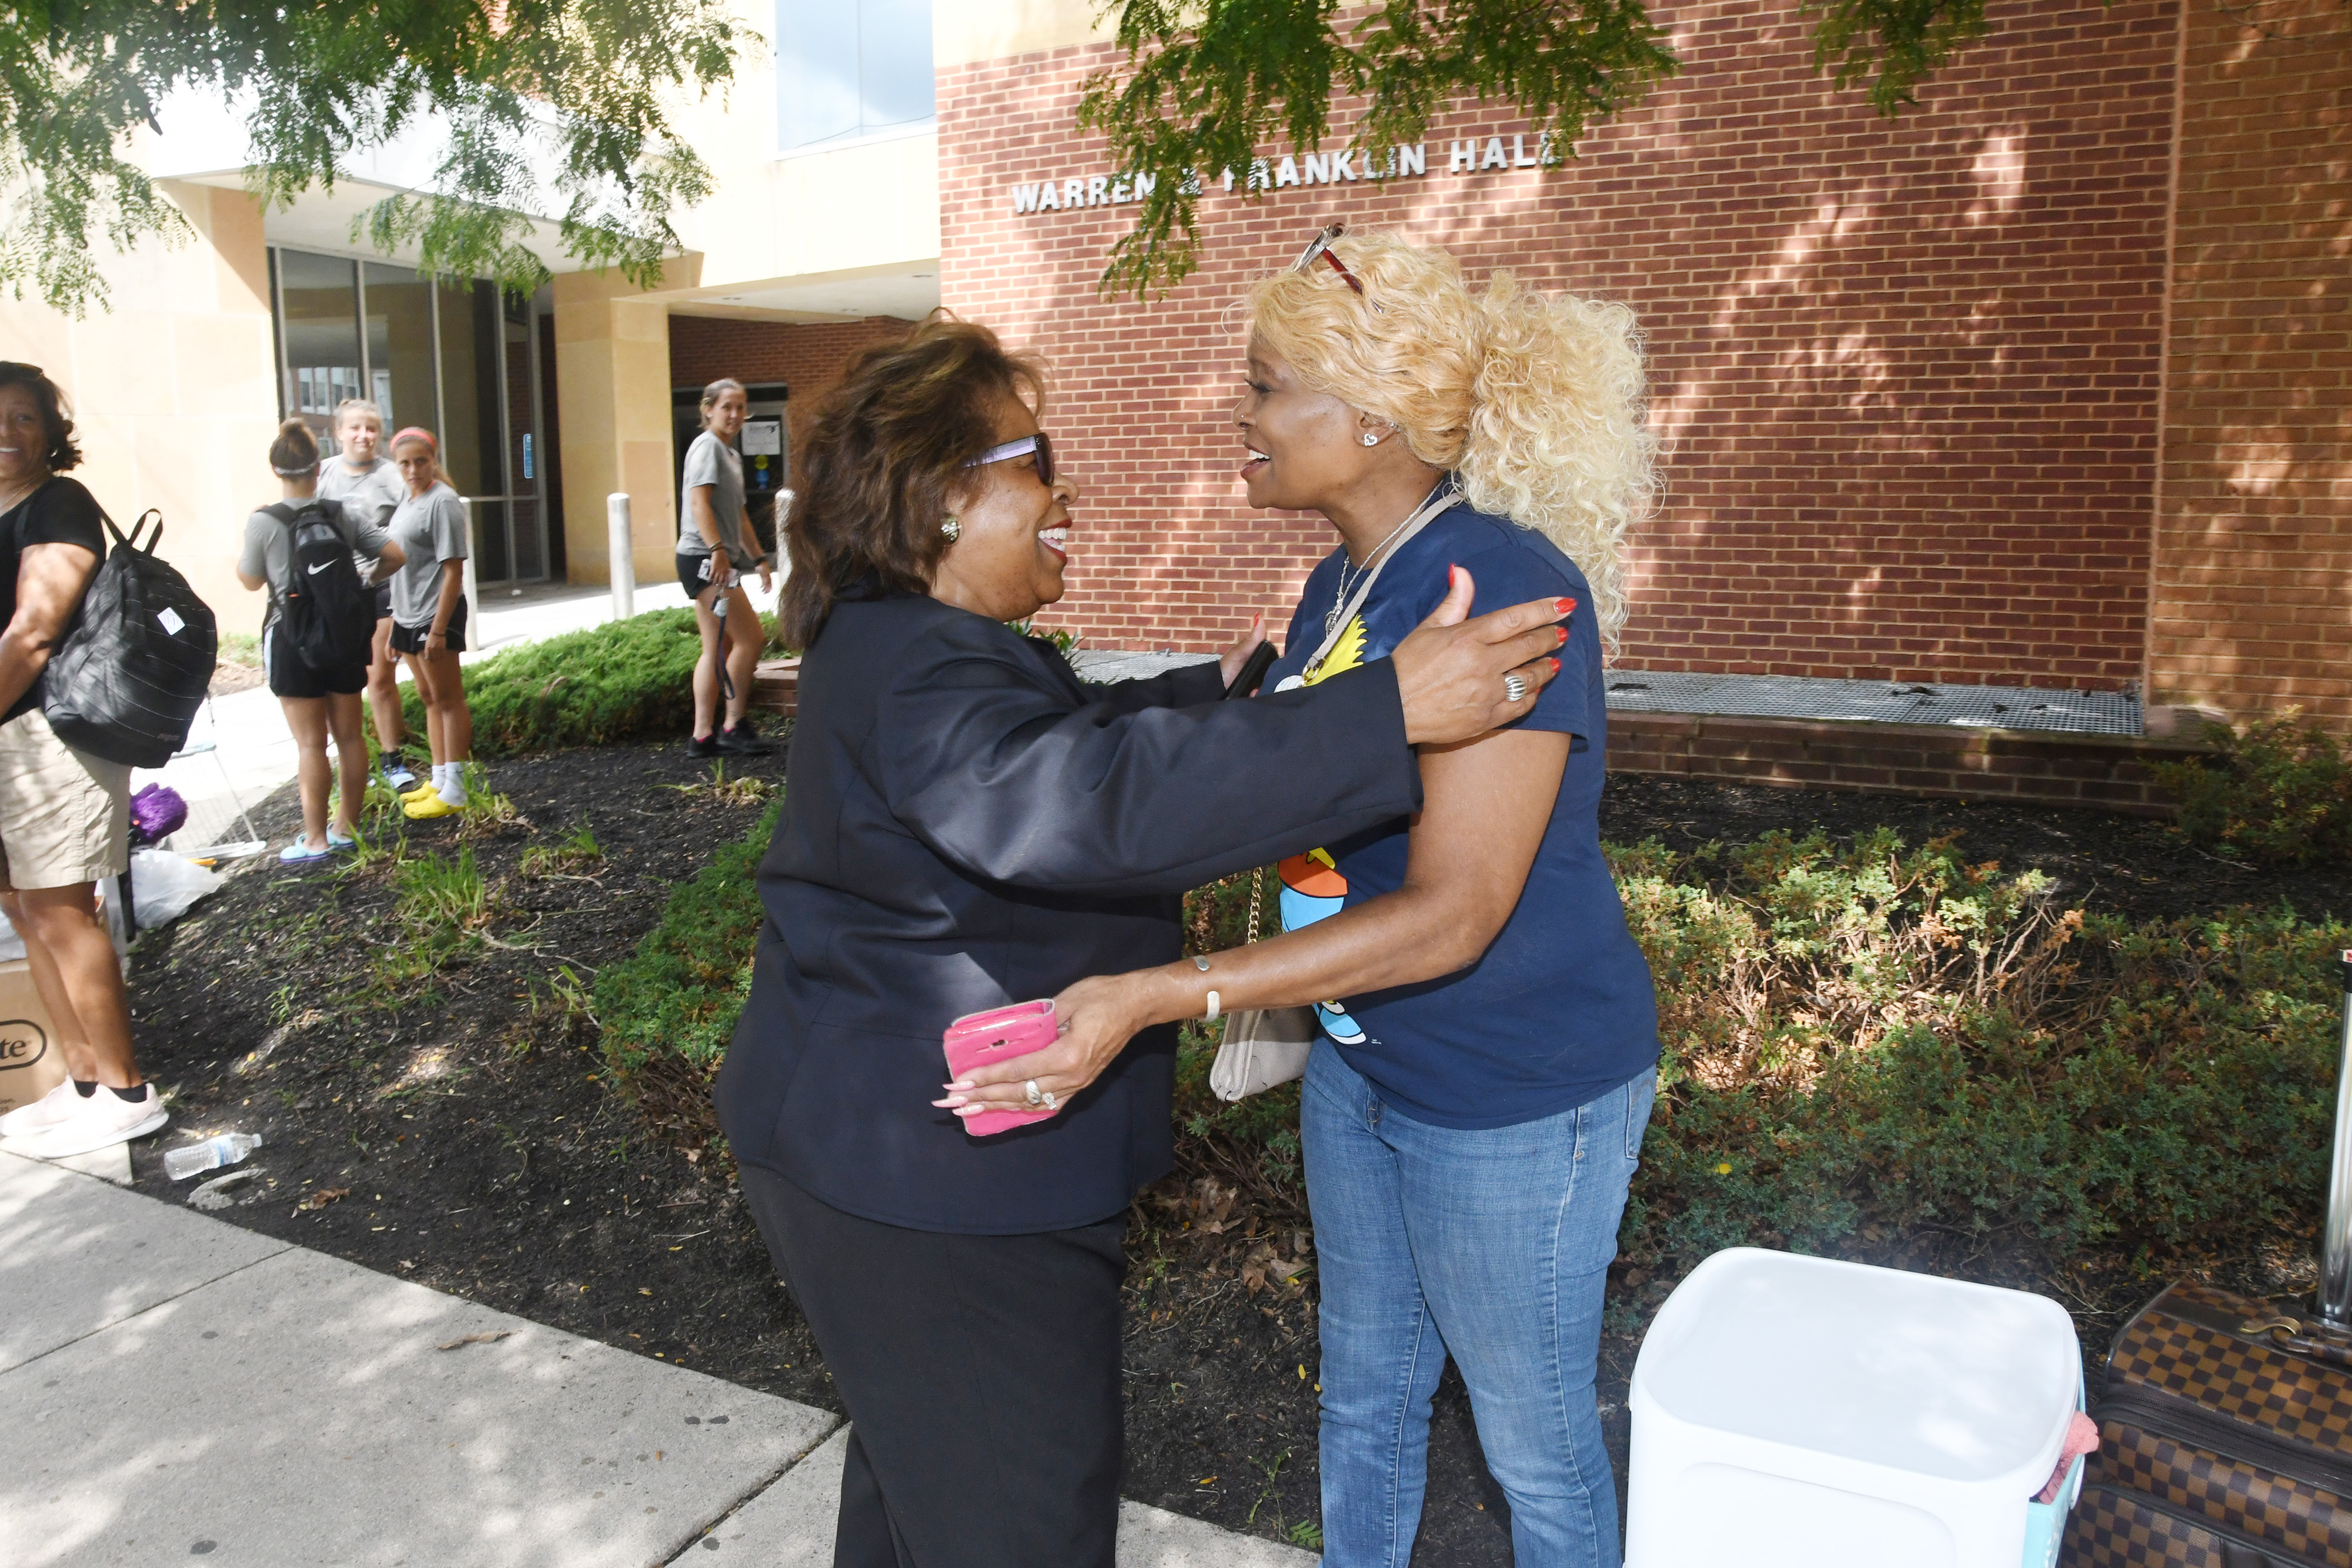 DSU President Wilma Mishoe greets a parent during Move-In Day on Aug. 22 in front of Warren Franklin Residential Hall.